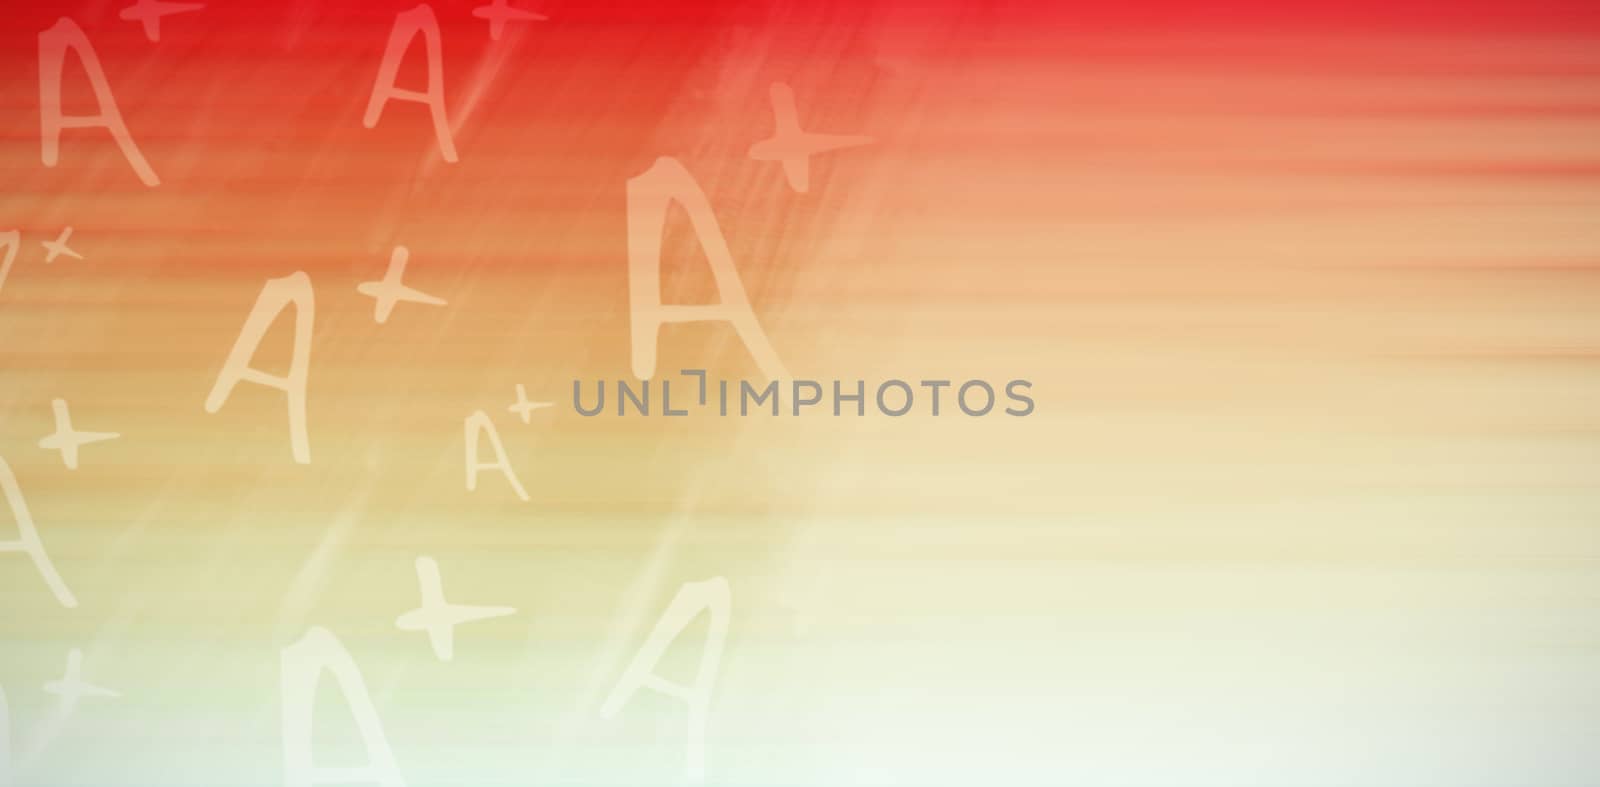 Graphic image of A plus grade against orange and yellow abstract backgrounds